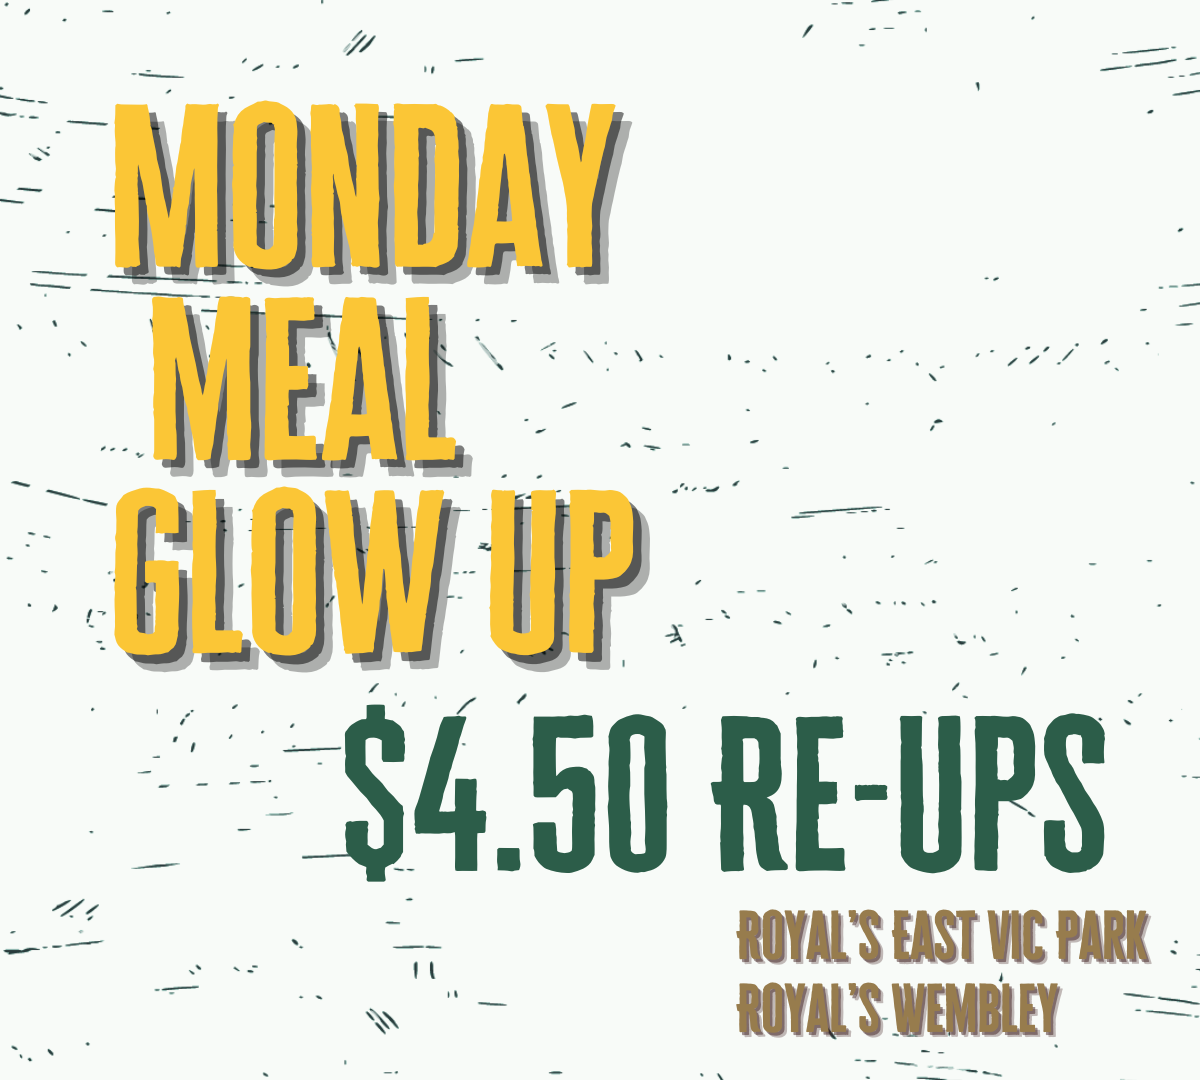 RoyAl's Chicken and Burger Specials: Monday Meal Glow Up